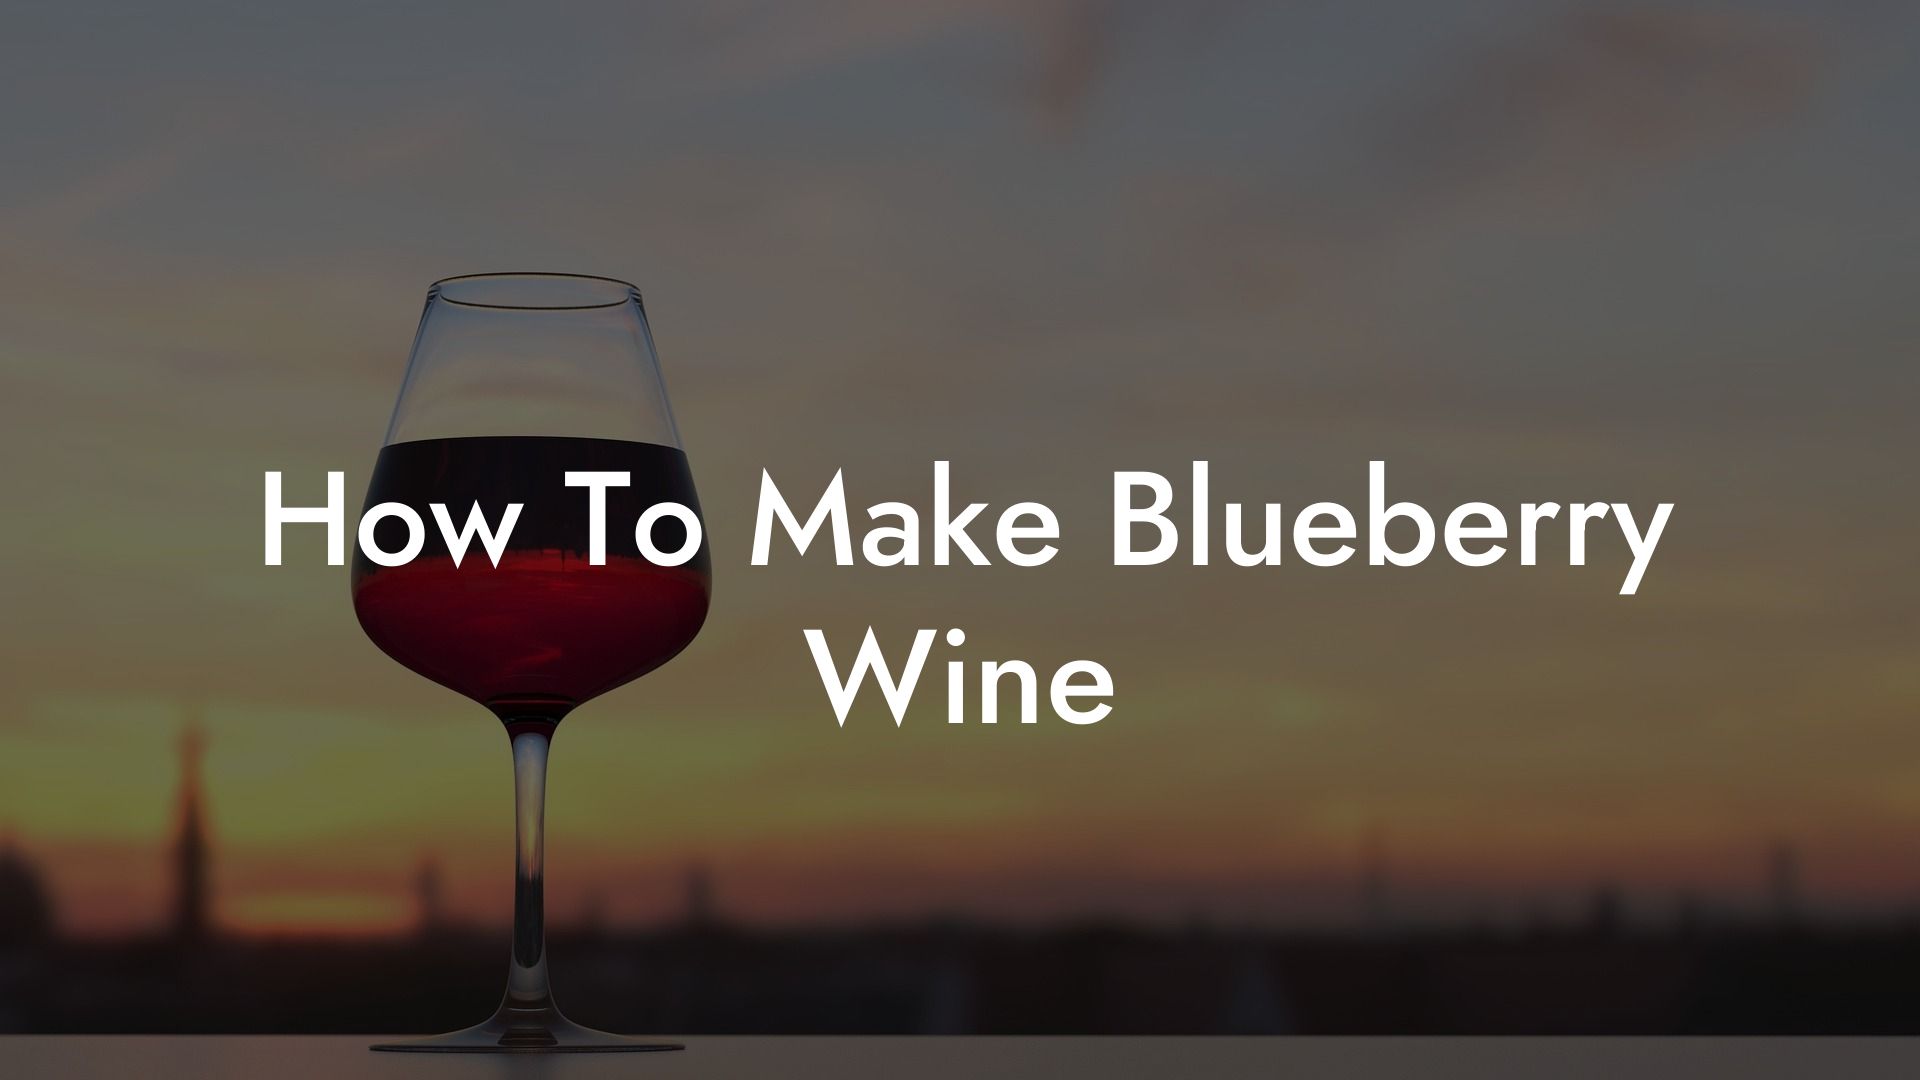 How To Make Blueberry Wine